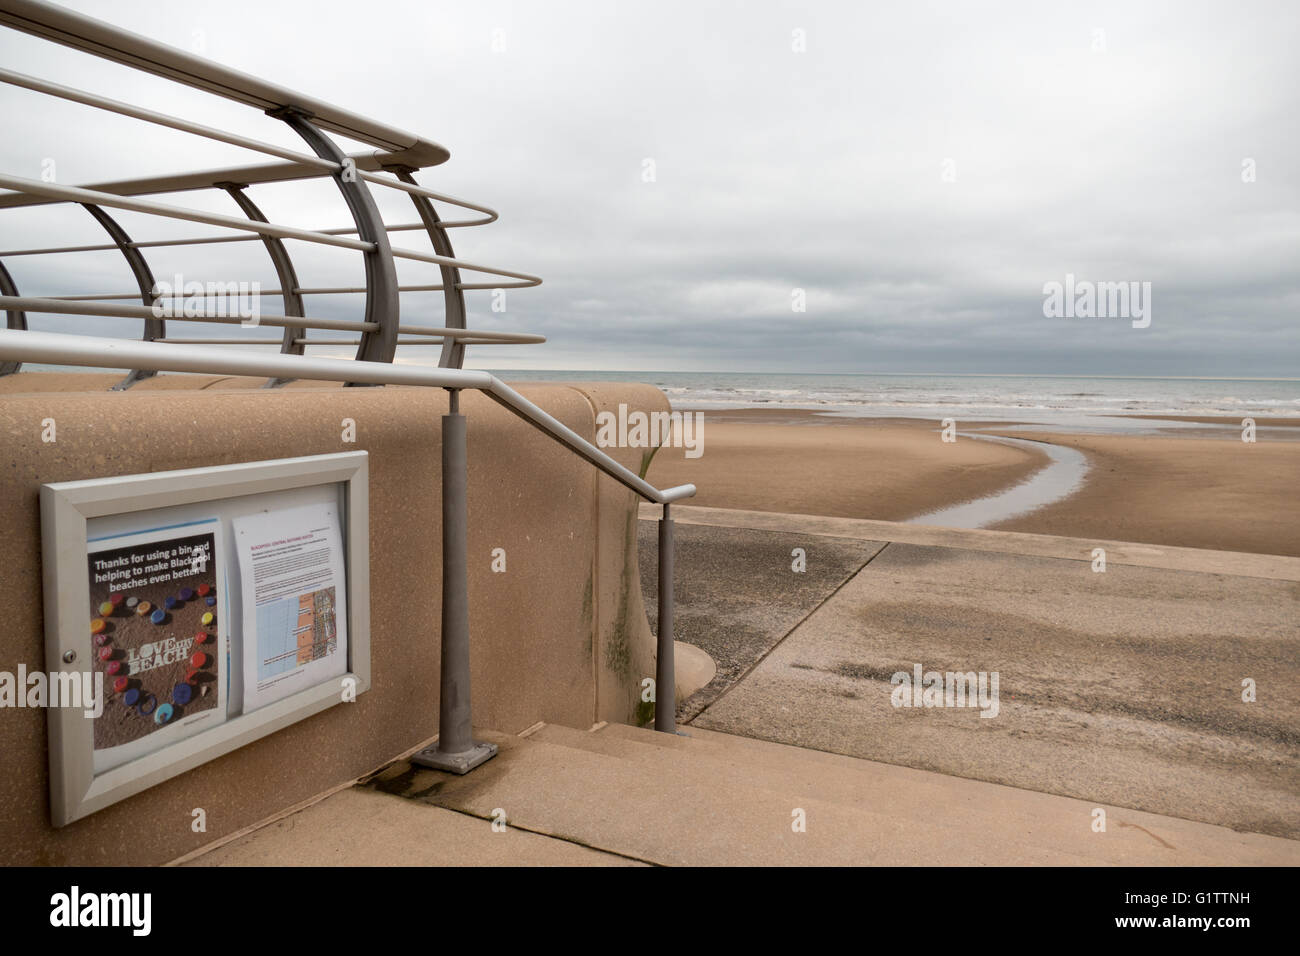 Blackpool, UK. 19th May 2016. Blackpool's south beach has won the prestigious Blue flag award for the quality of it's sea water. Blackpool's two other beaches central and north have also won awards for their cleanliness. Great news for the resort for this coming season. Credit:  gary telford/Alamy Live News Stock Photo